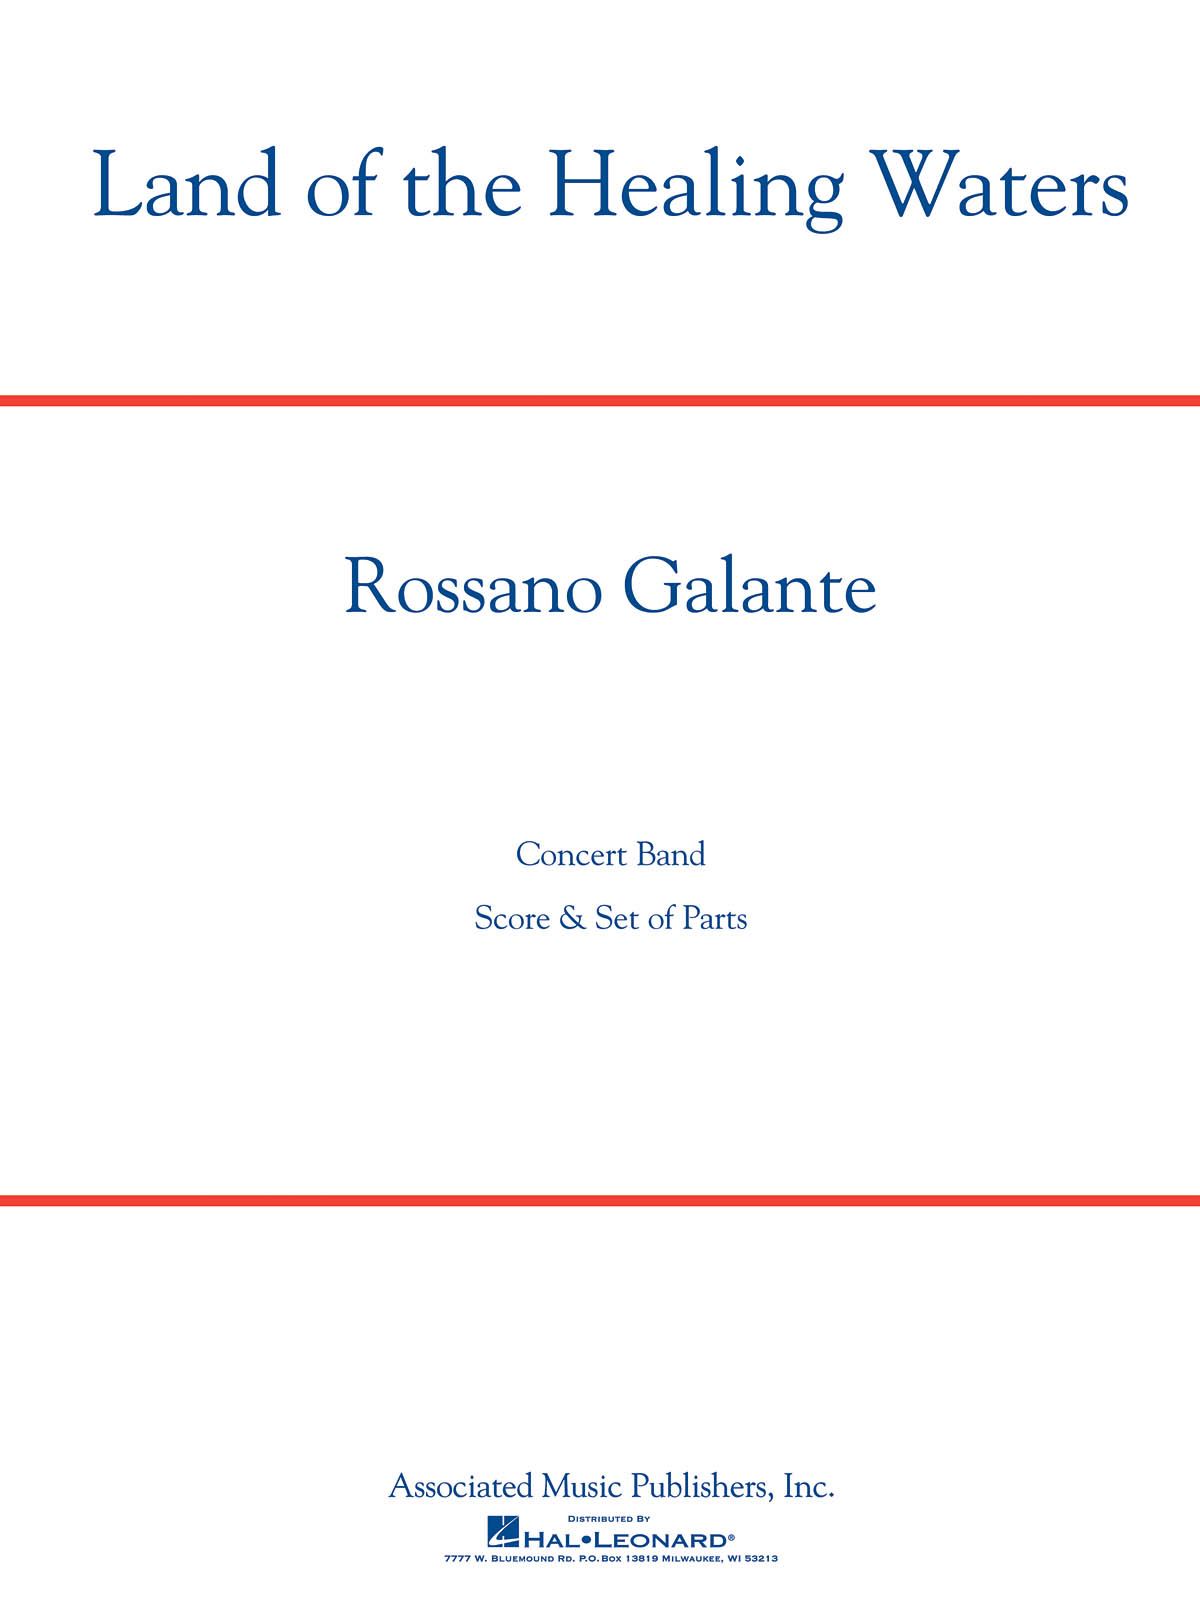 Rossano Galante: Land of the Healing Waters: Concert Band: Score and Parts